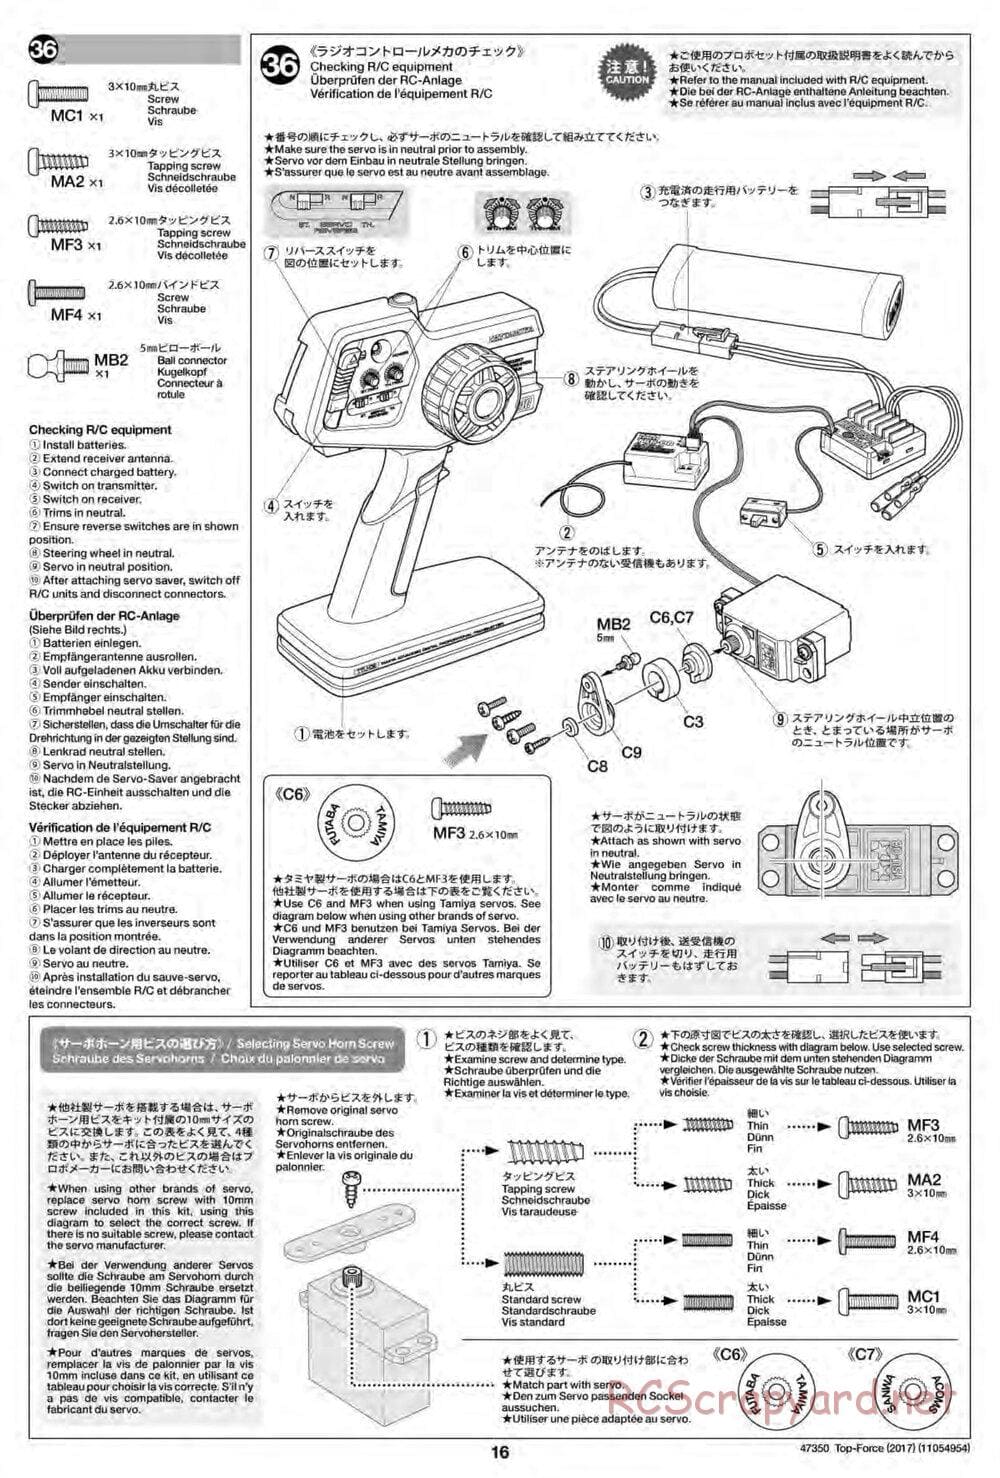 Tamiya - Top Force 2017 - DF-01 Chassis - Manual - Page 16